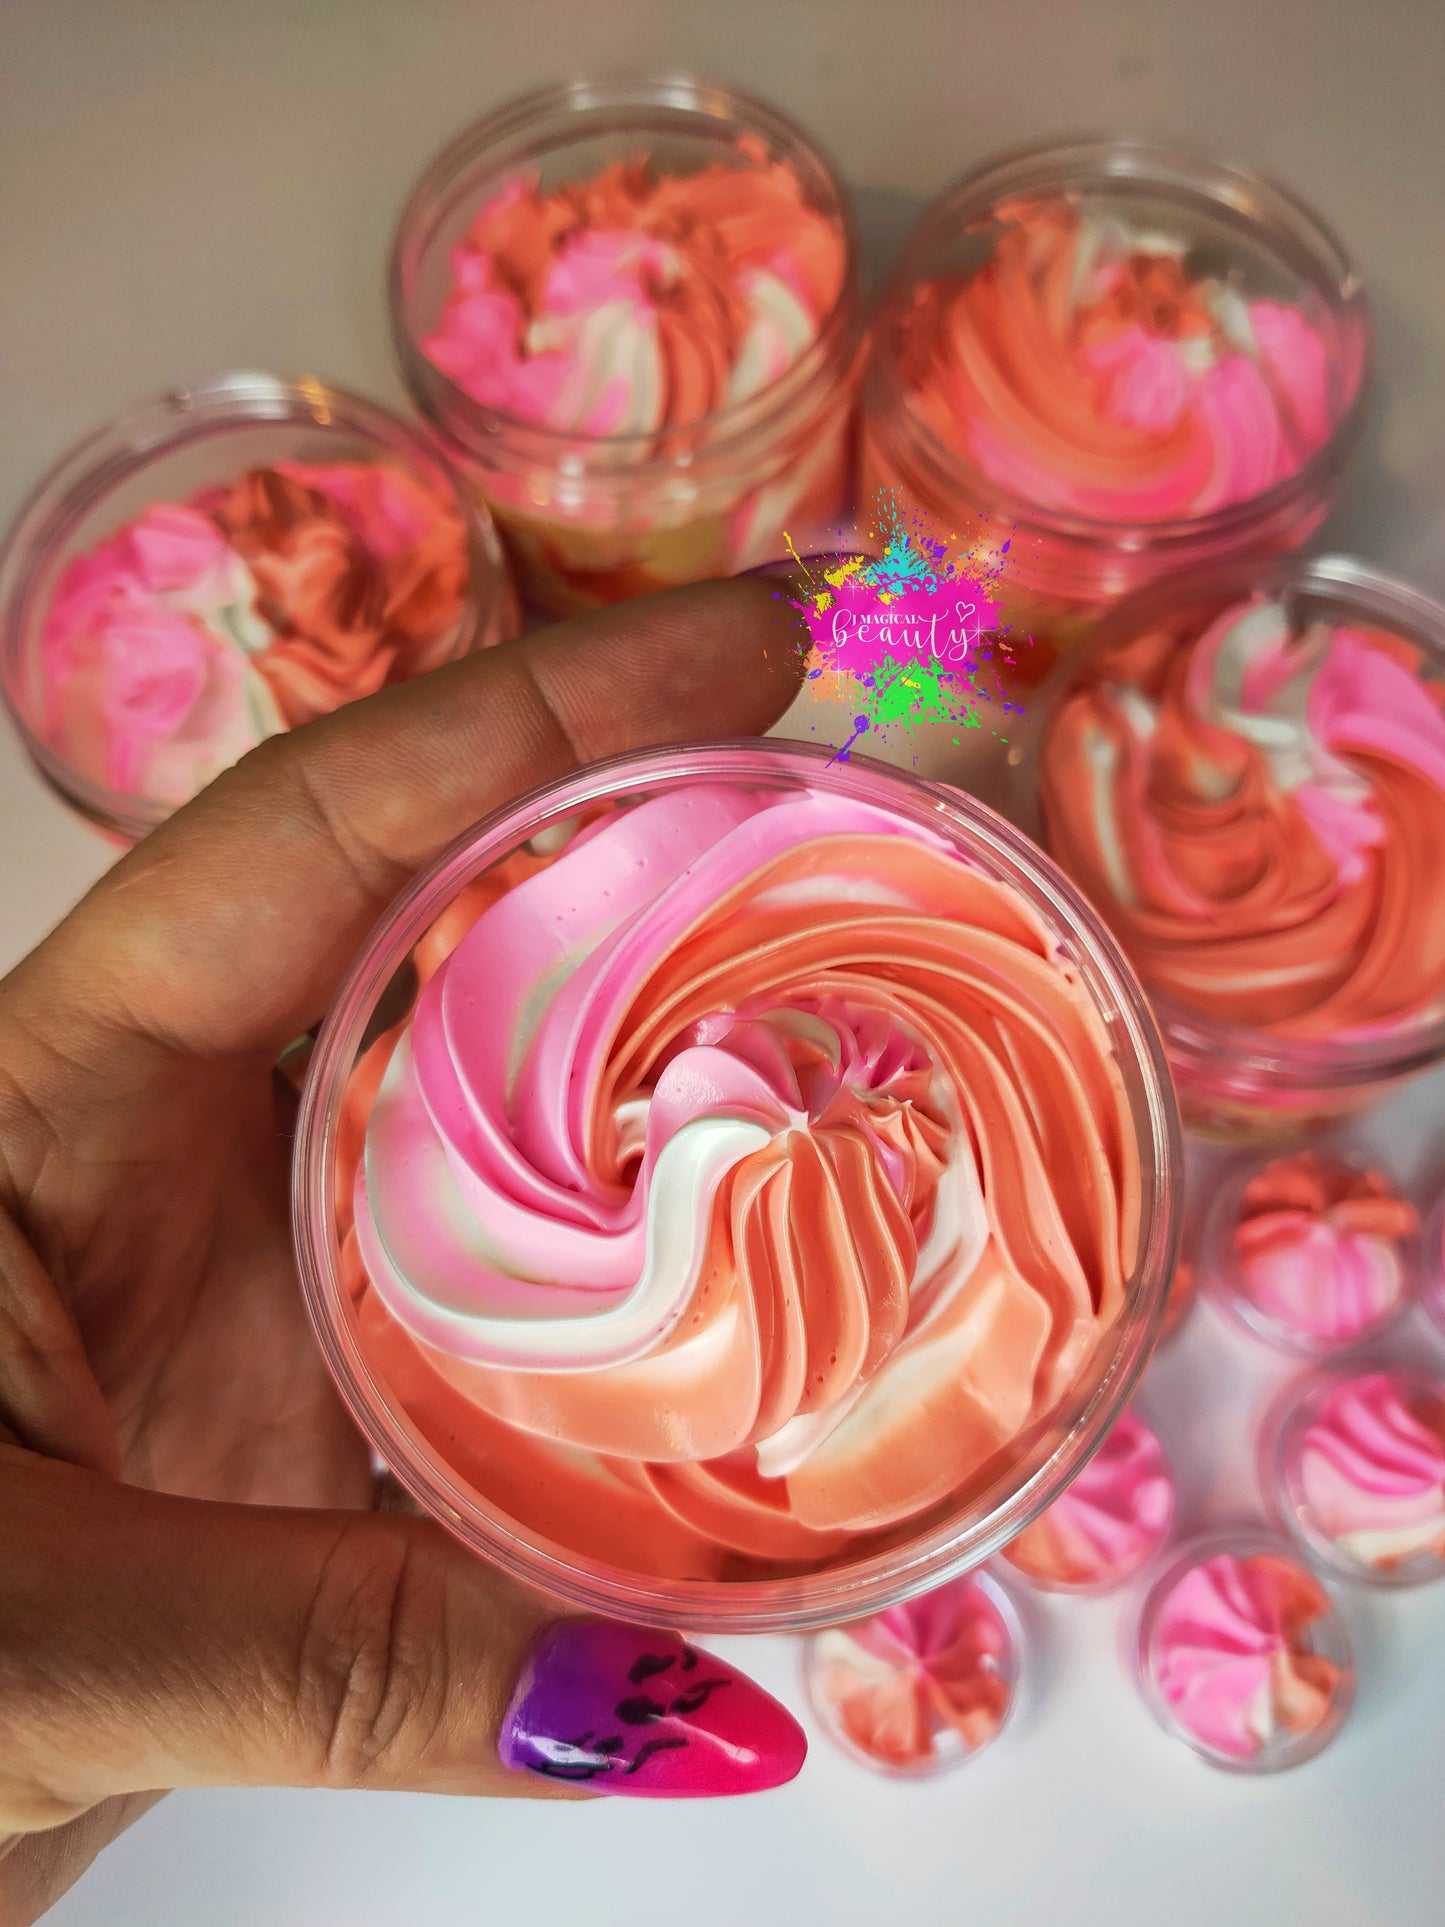 Marshmallow & Pink Lychee scent Whipped Body Butter